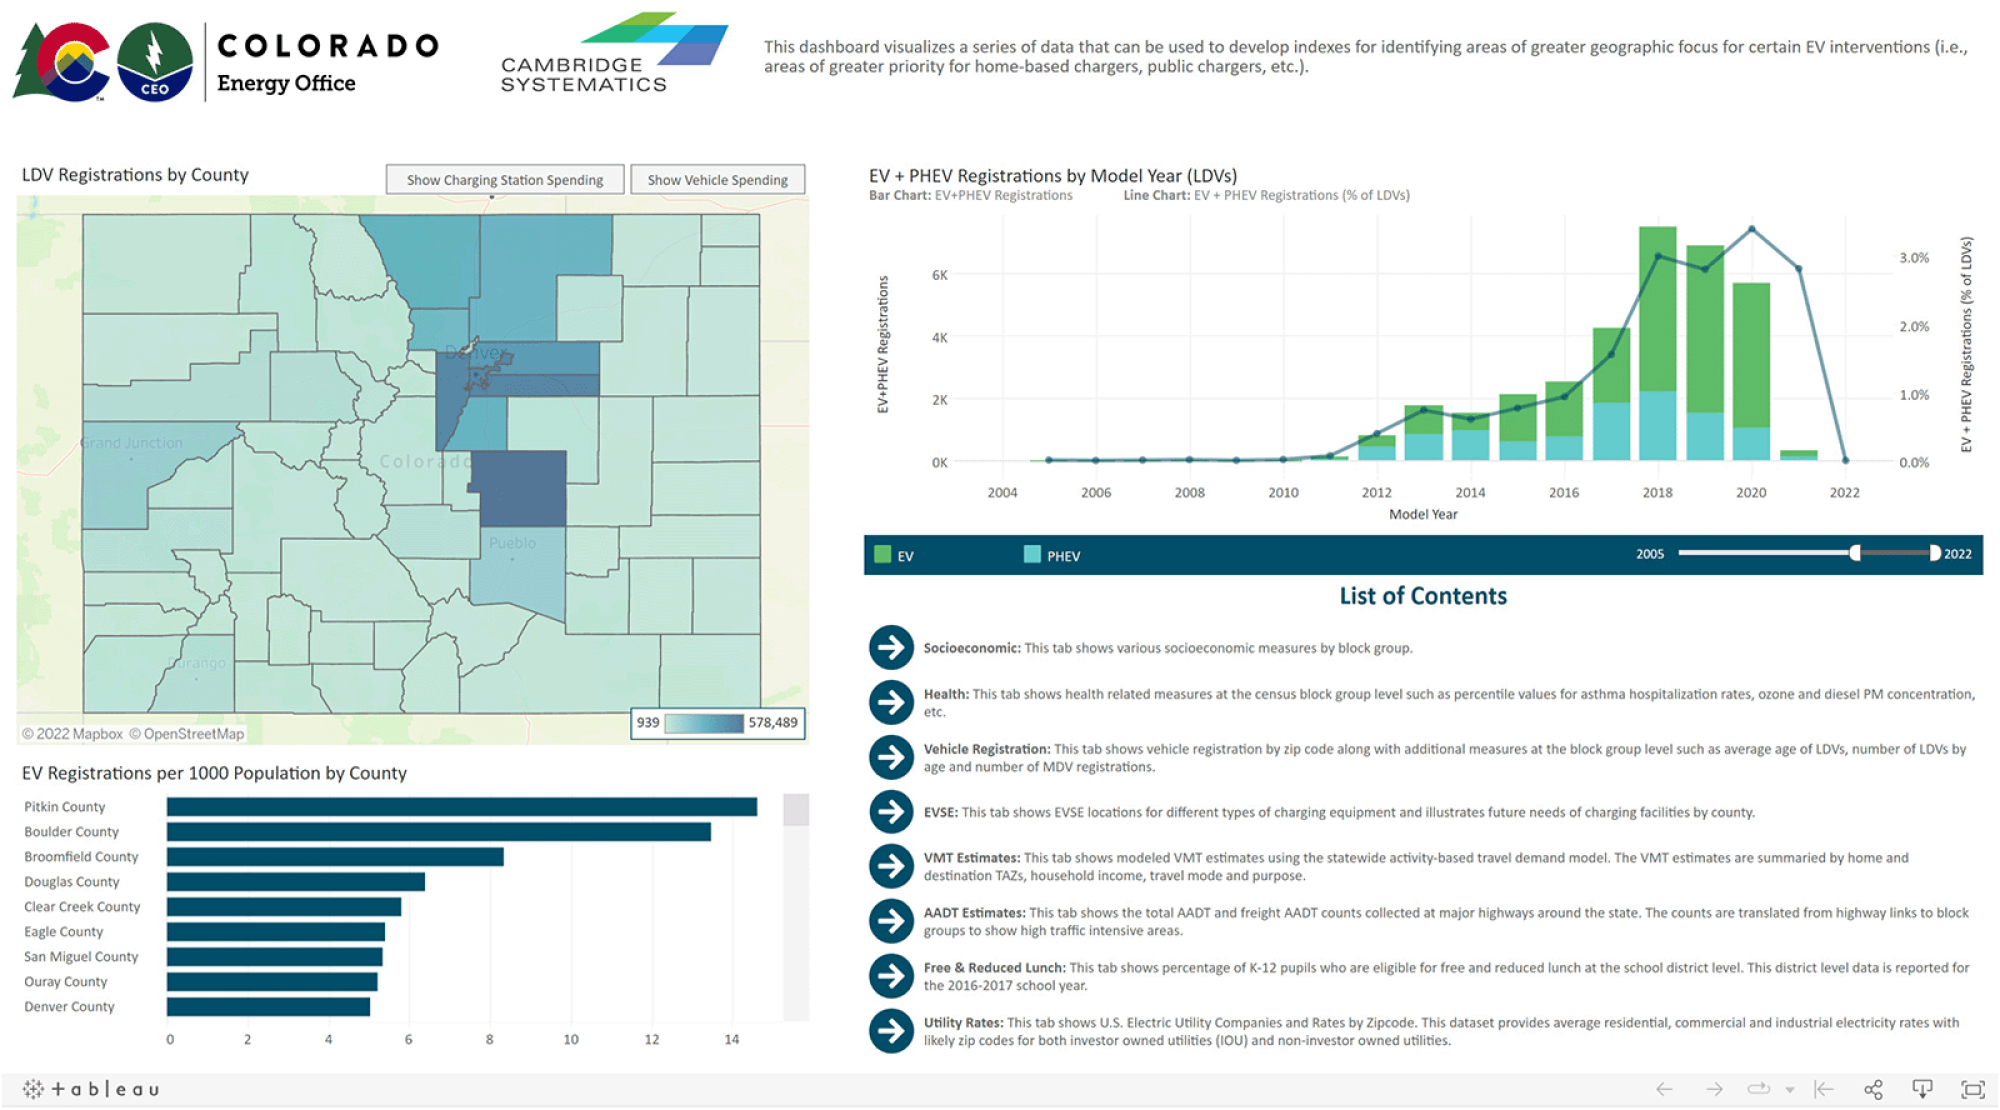 The Colorado EV Equity Dashboard built by CS allows users to explore data related to vehicle electrification and identifying priority areas for certain EV interventions